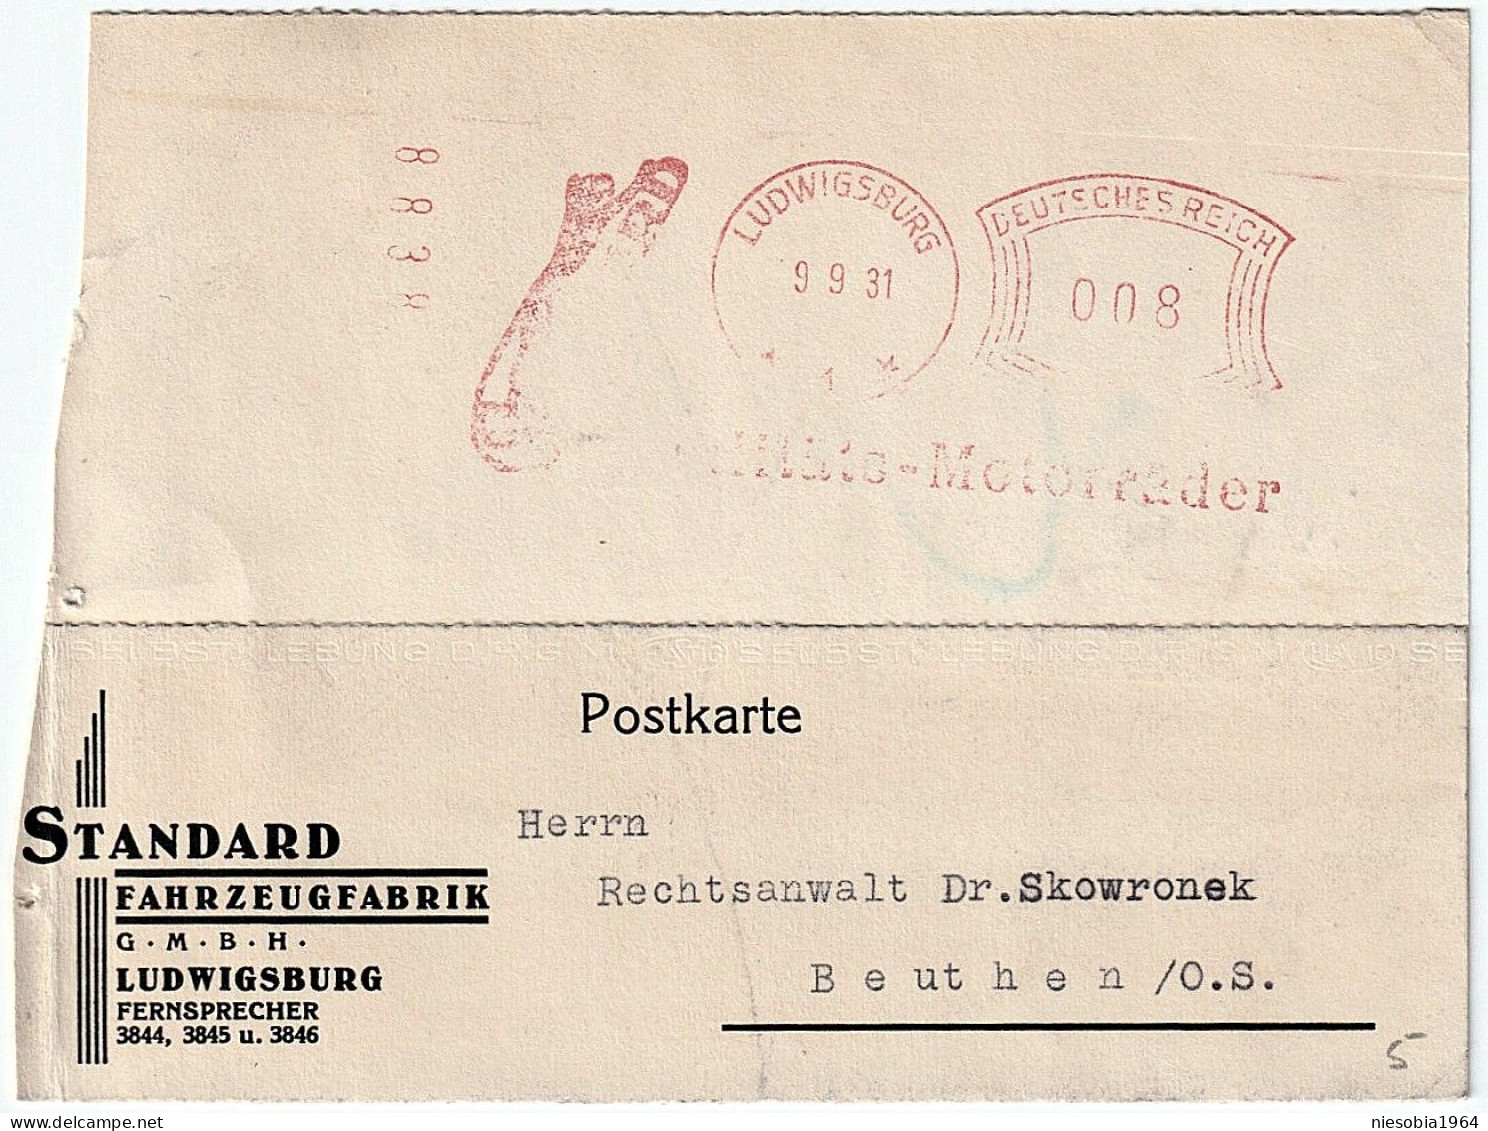 STANDARD Vehicle Factory Company Postcard Special Seal DR 006 Ludwigsburg 09.09.1931 - Postkarten